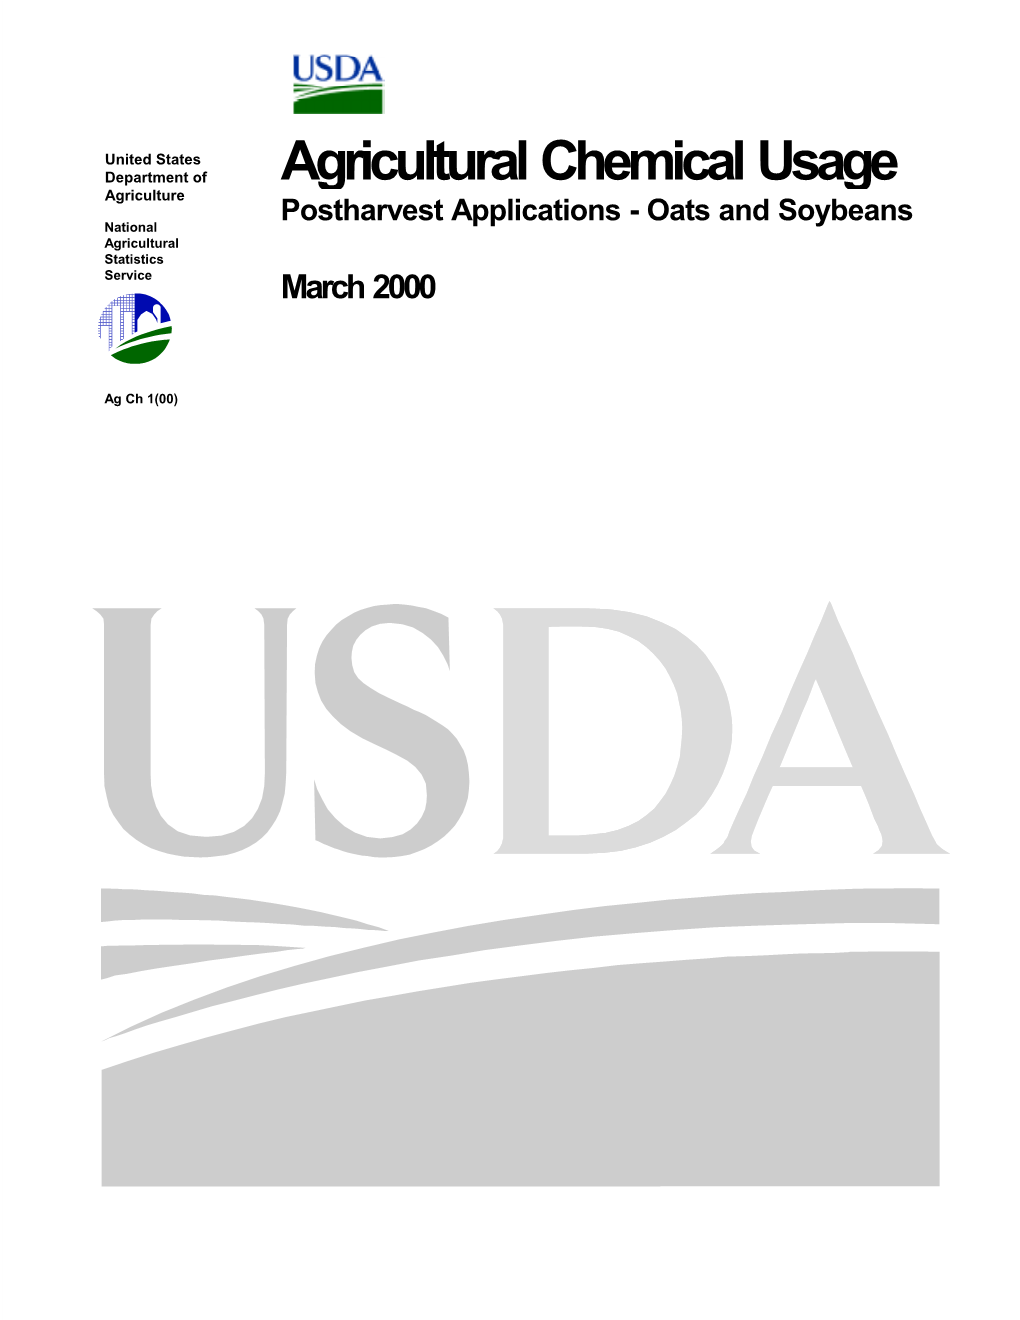 Agricultural Chemical Usage Agriculture Postharvest Applications - Oats and Soybeans National Agricultural Statistics Service March 2000